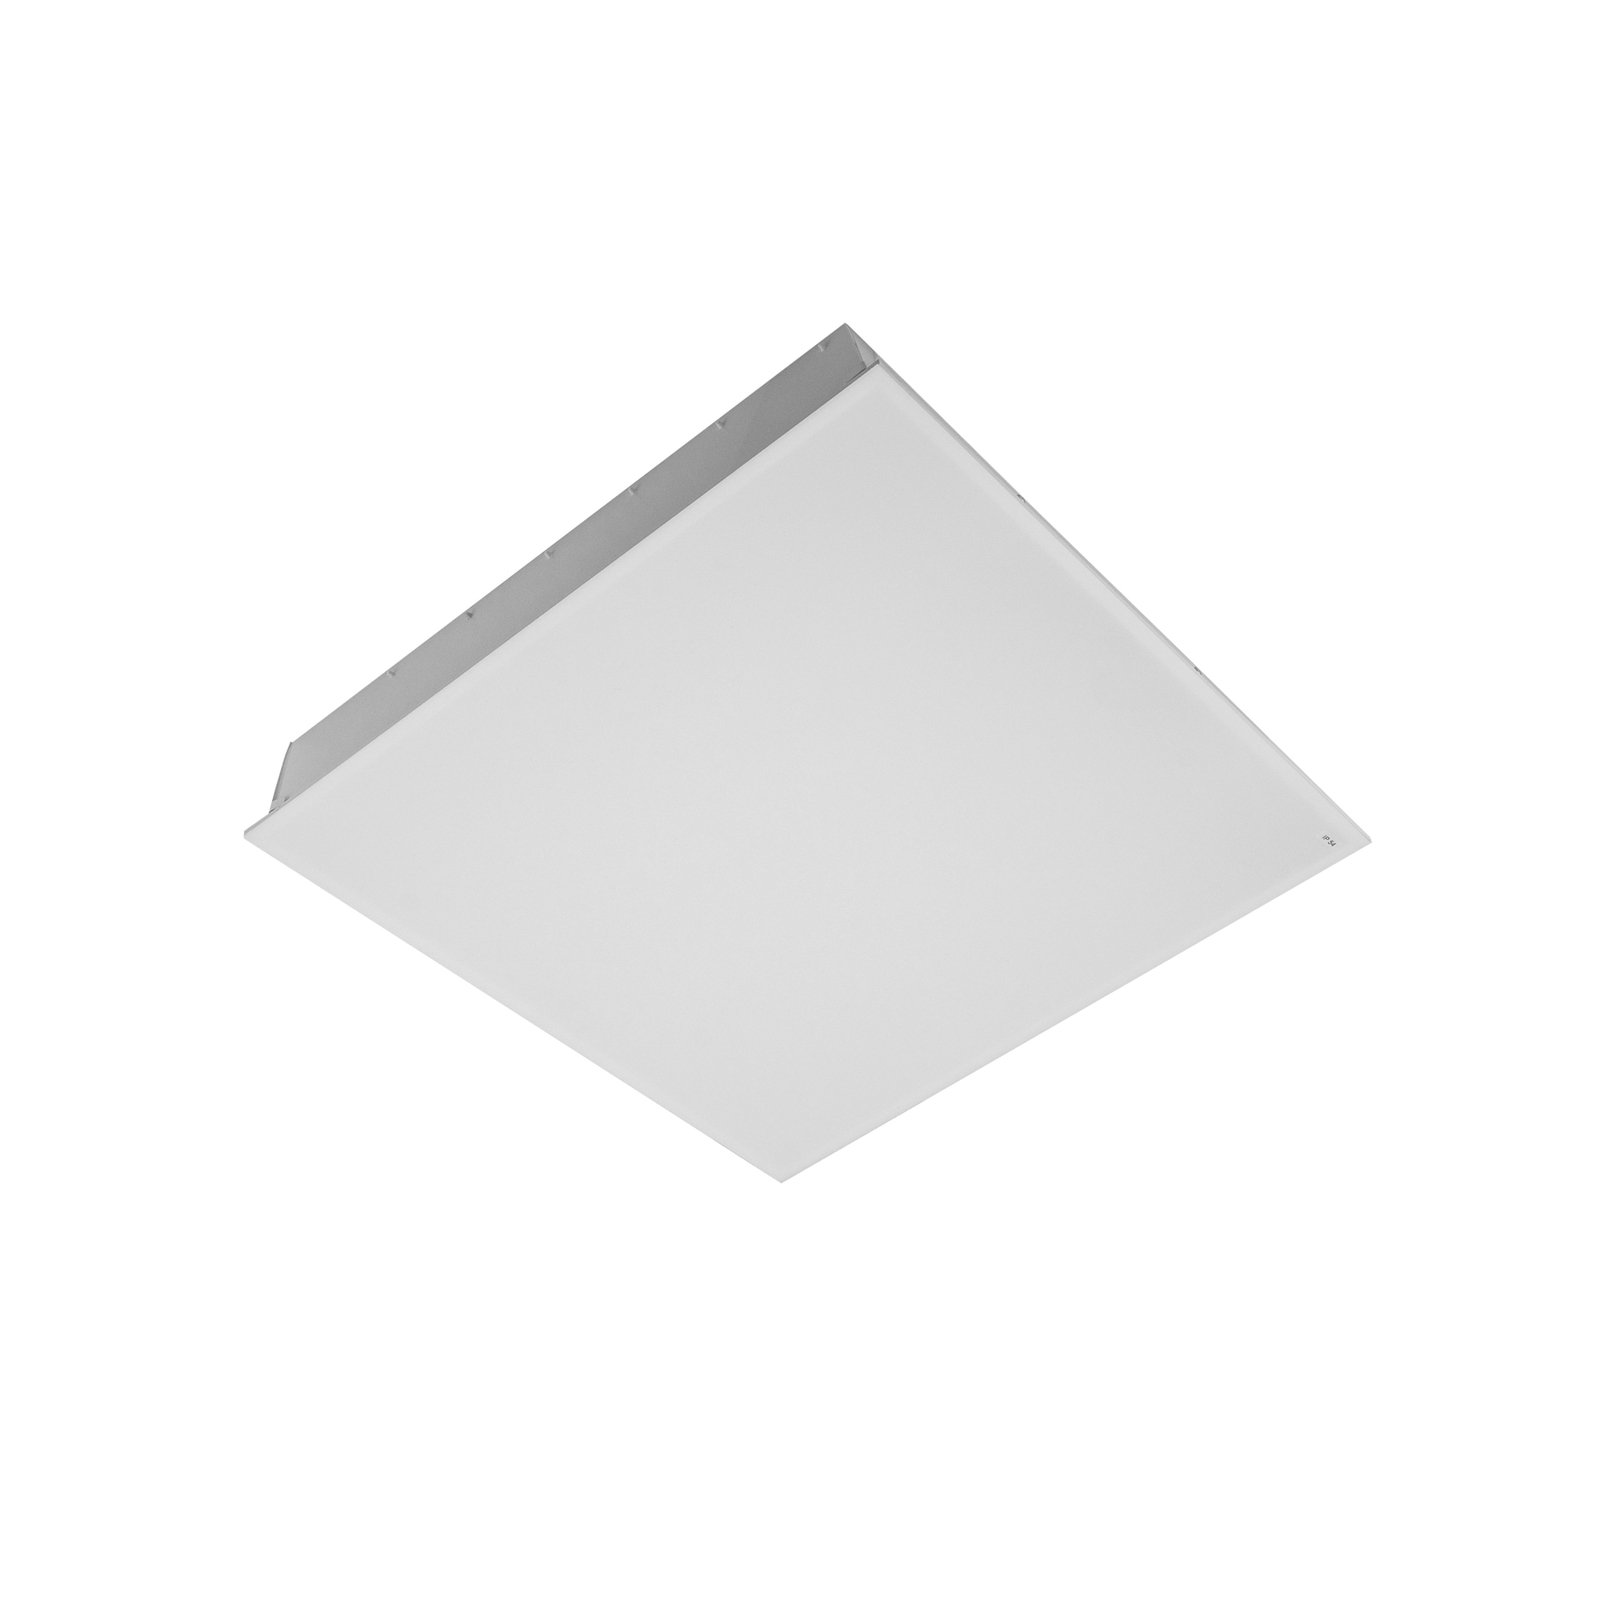 IBP6000 recessed LED panel 625 OP on/off 55W 840